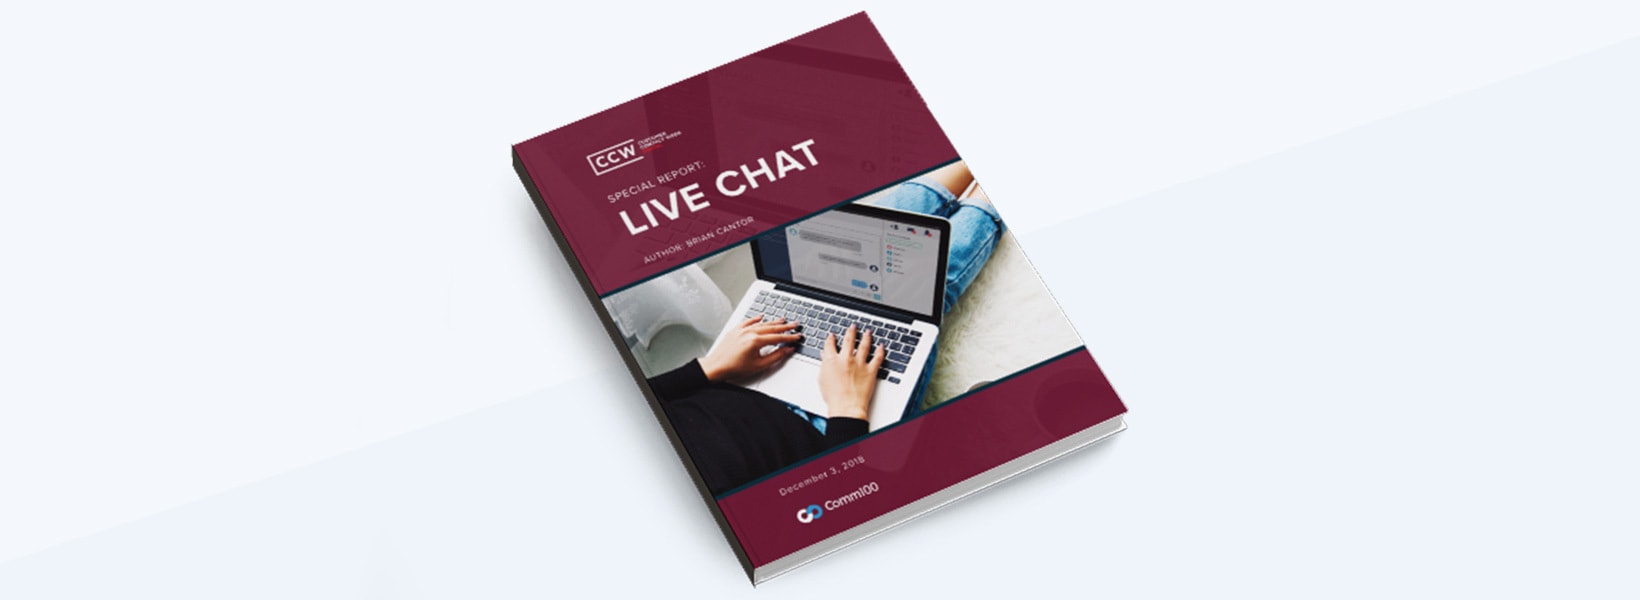 Customer Contact Week Digital: Live Chat Special Report